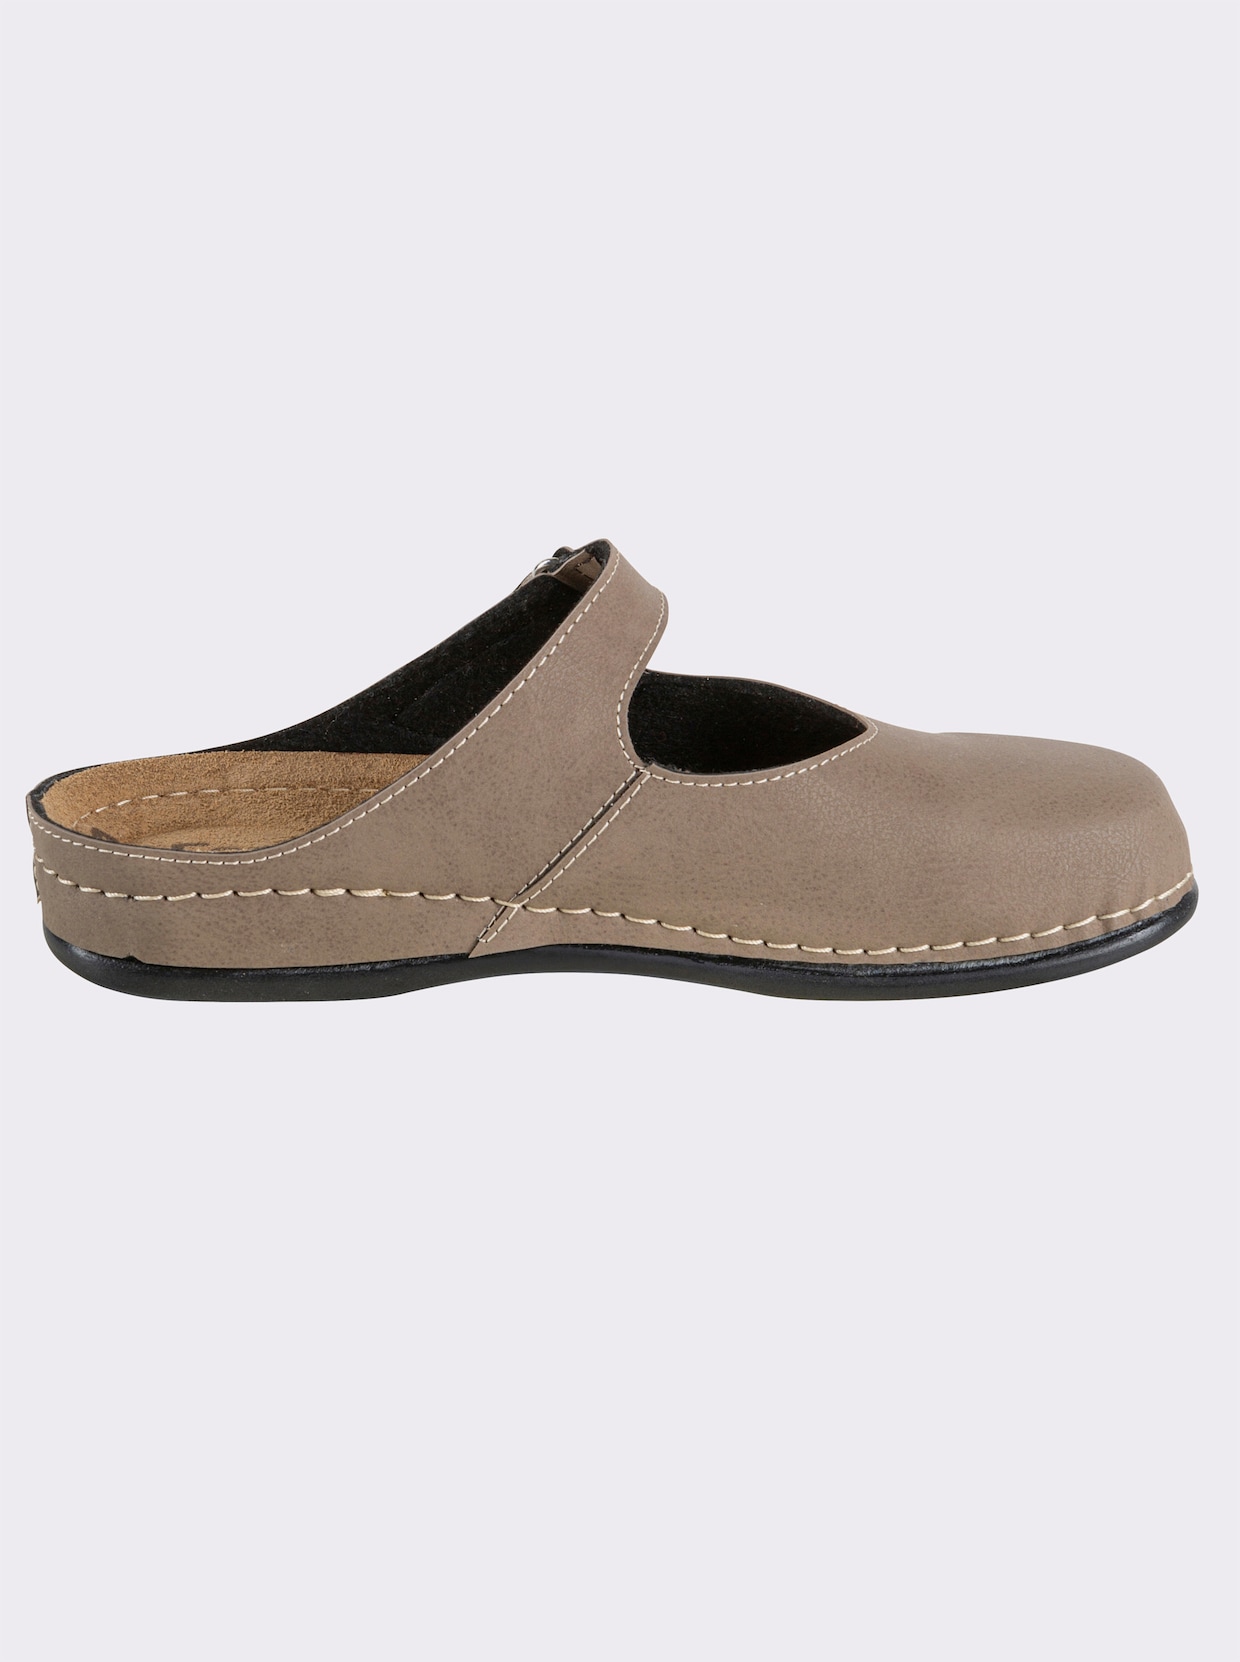 Dr. Feet Slippers - taupe